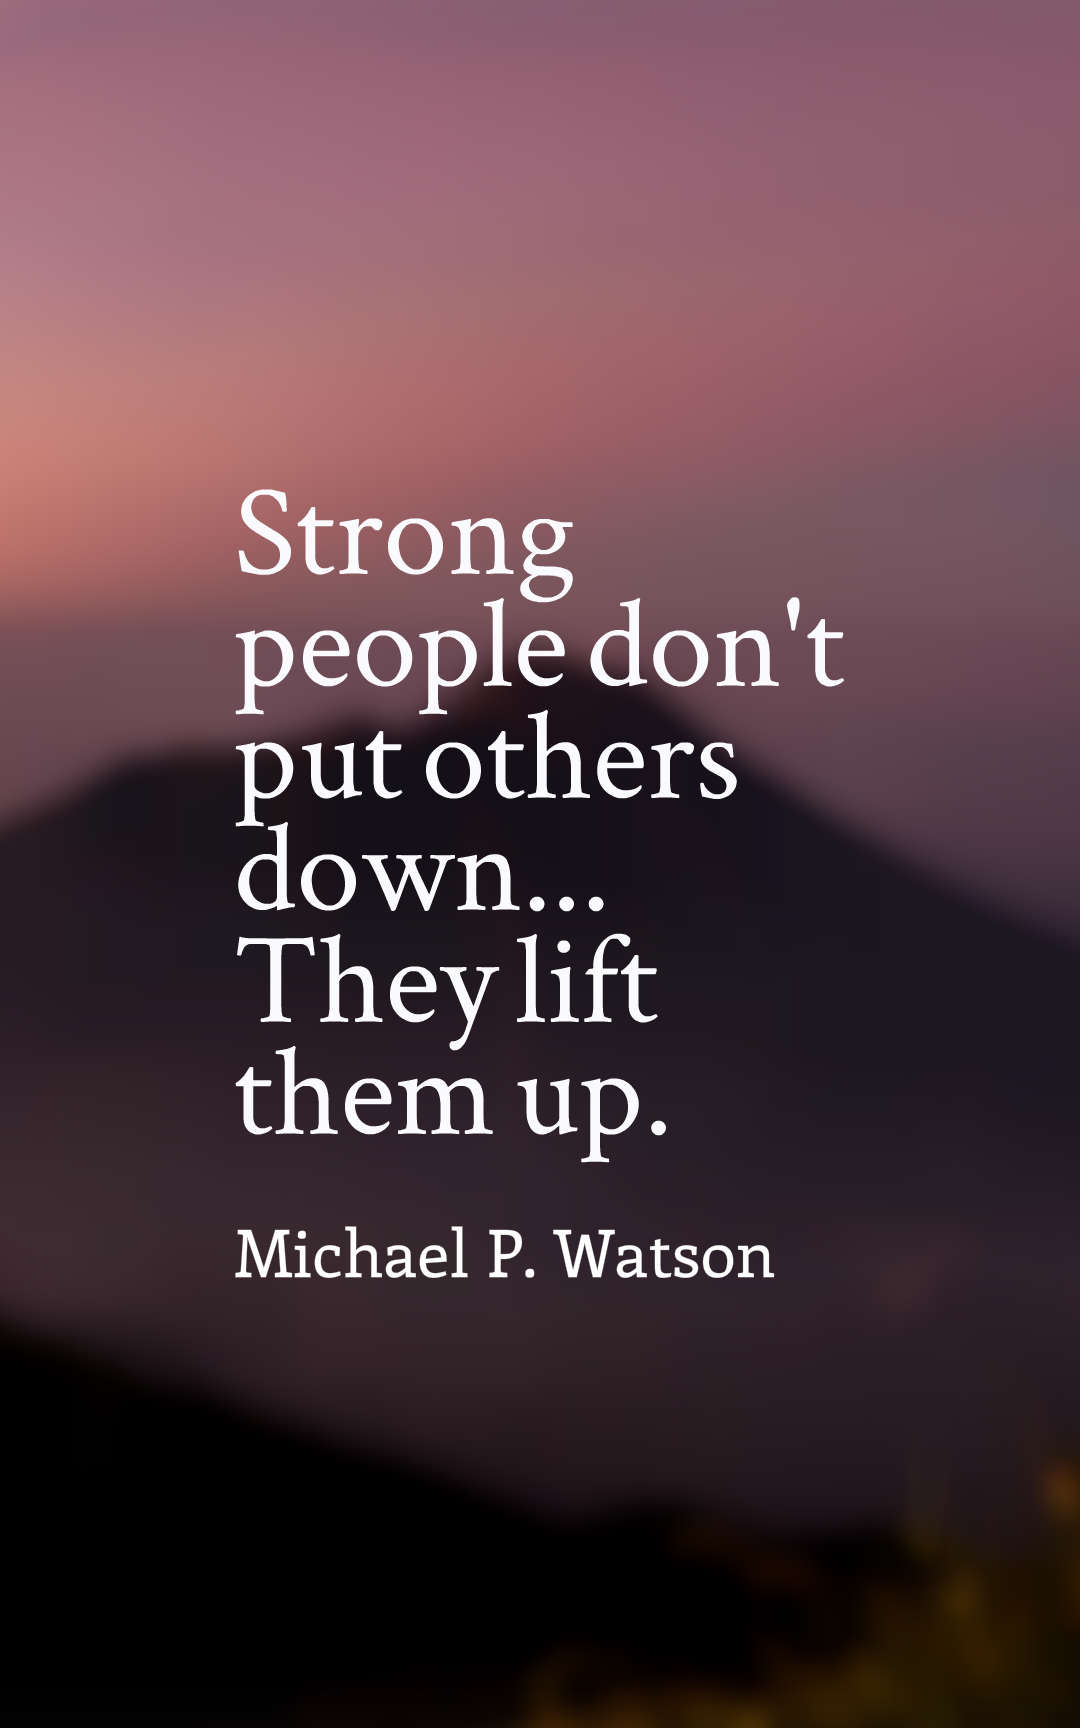 Strong people don't put others down... They lift them up.